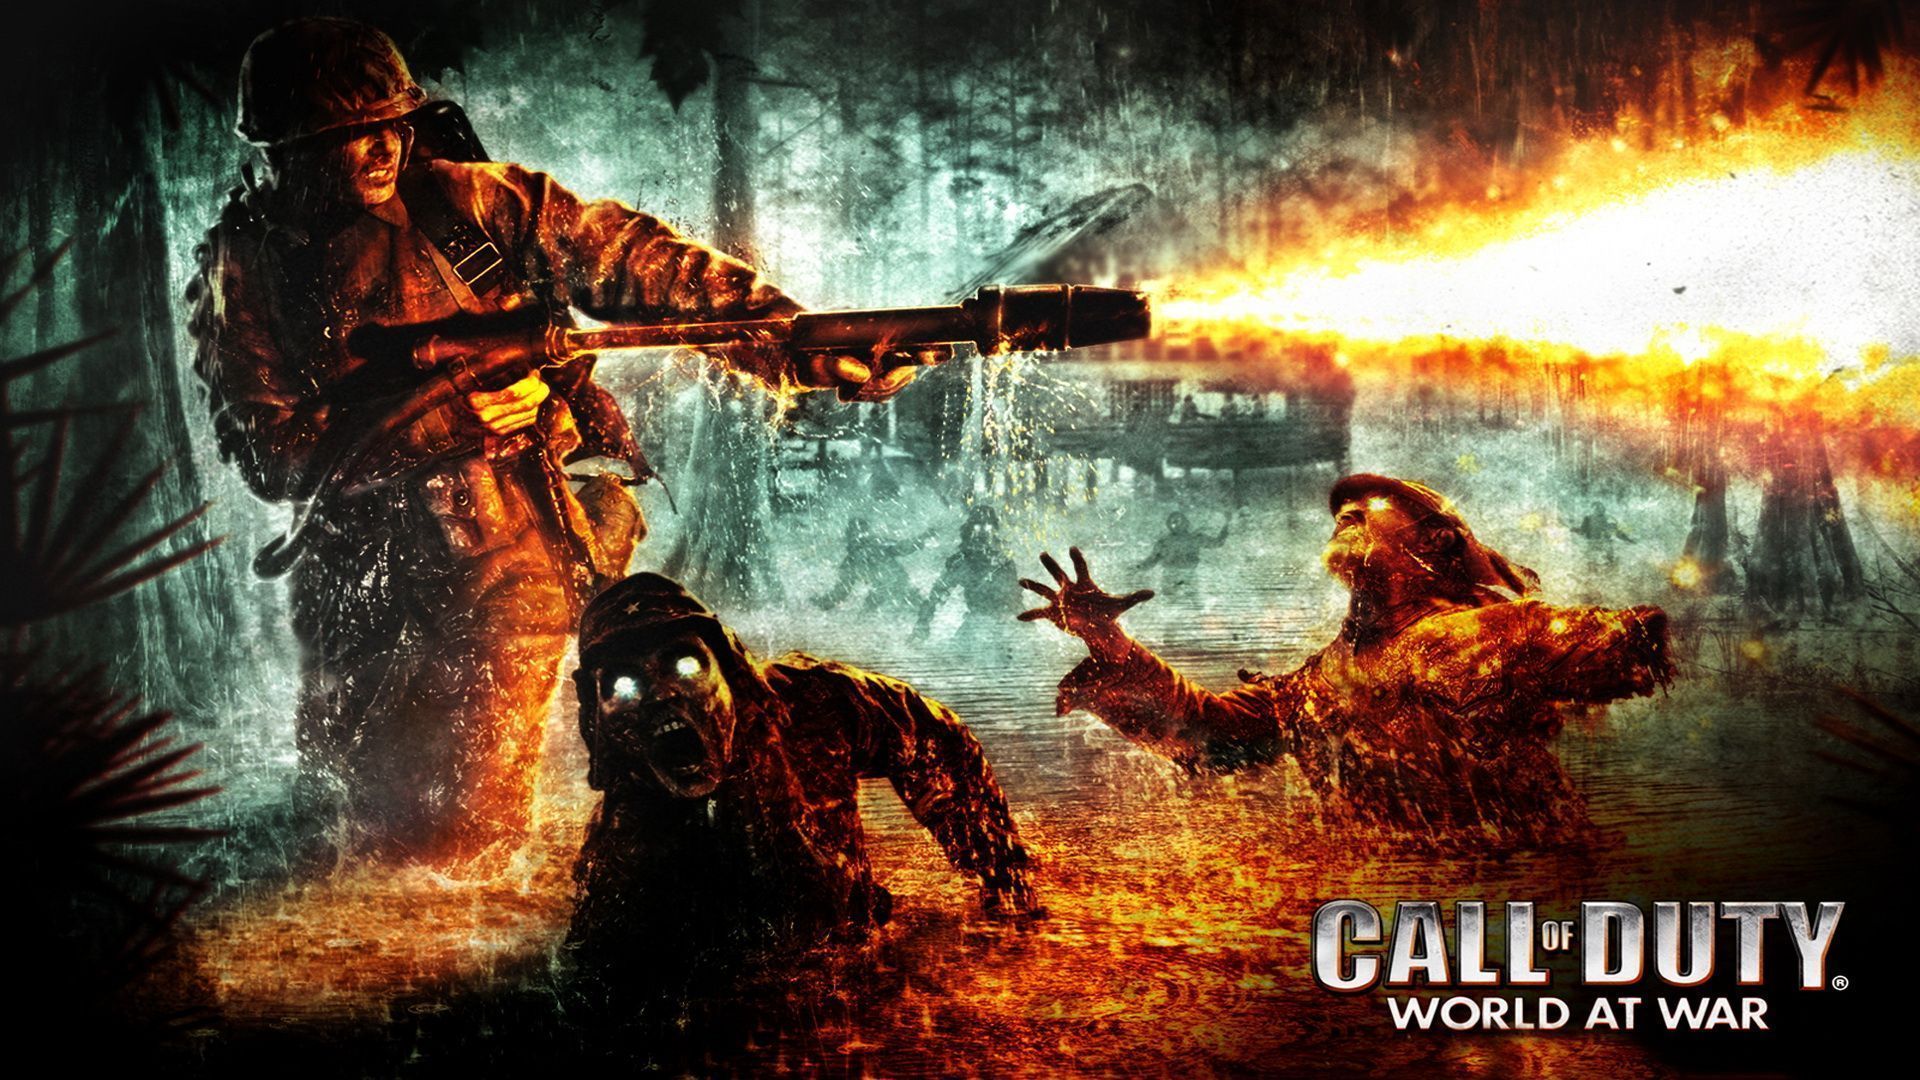 Call of Duty 5 World at War Wallpapers and Images | Cool Wallpapers